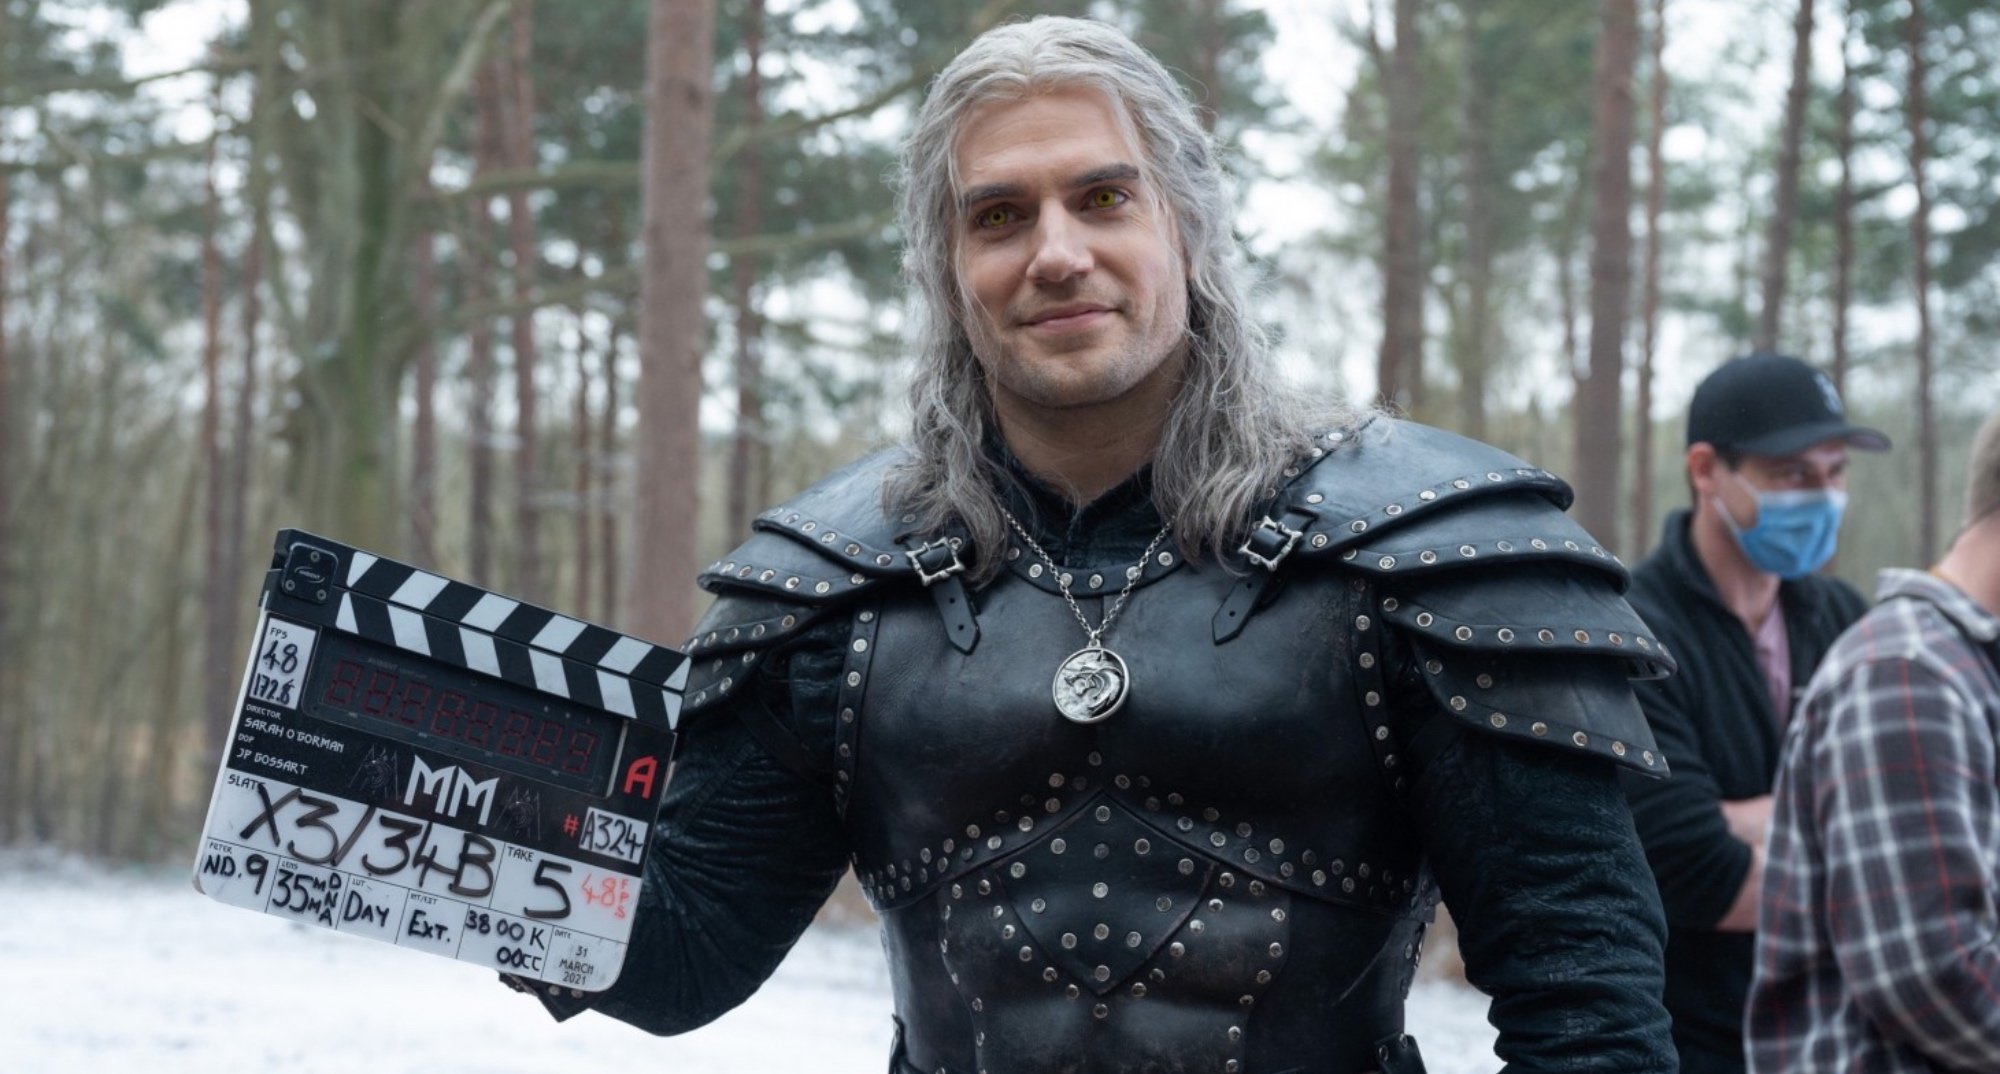 The Witcher season 3 release date, Henry Cavill's future, and everything  else we know about volume 2